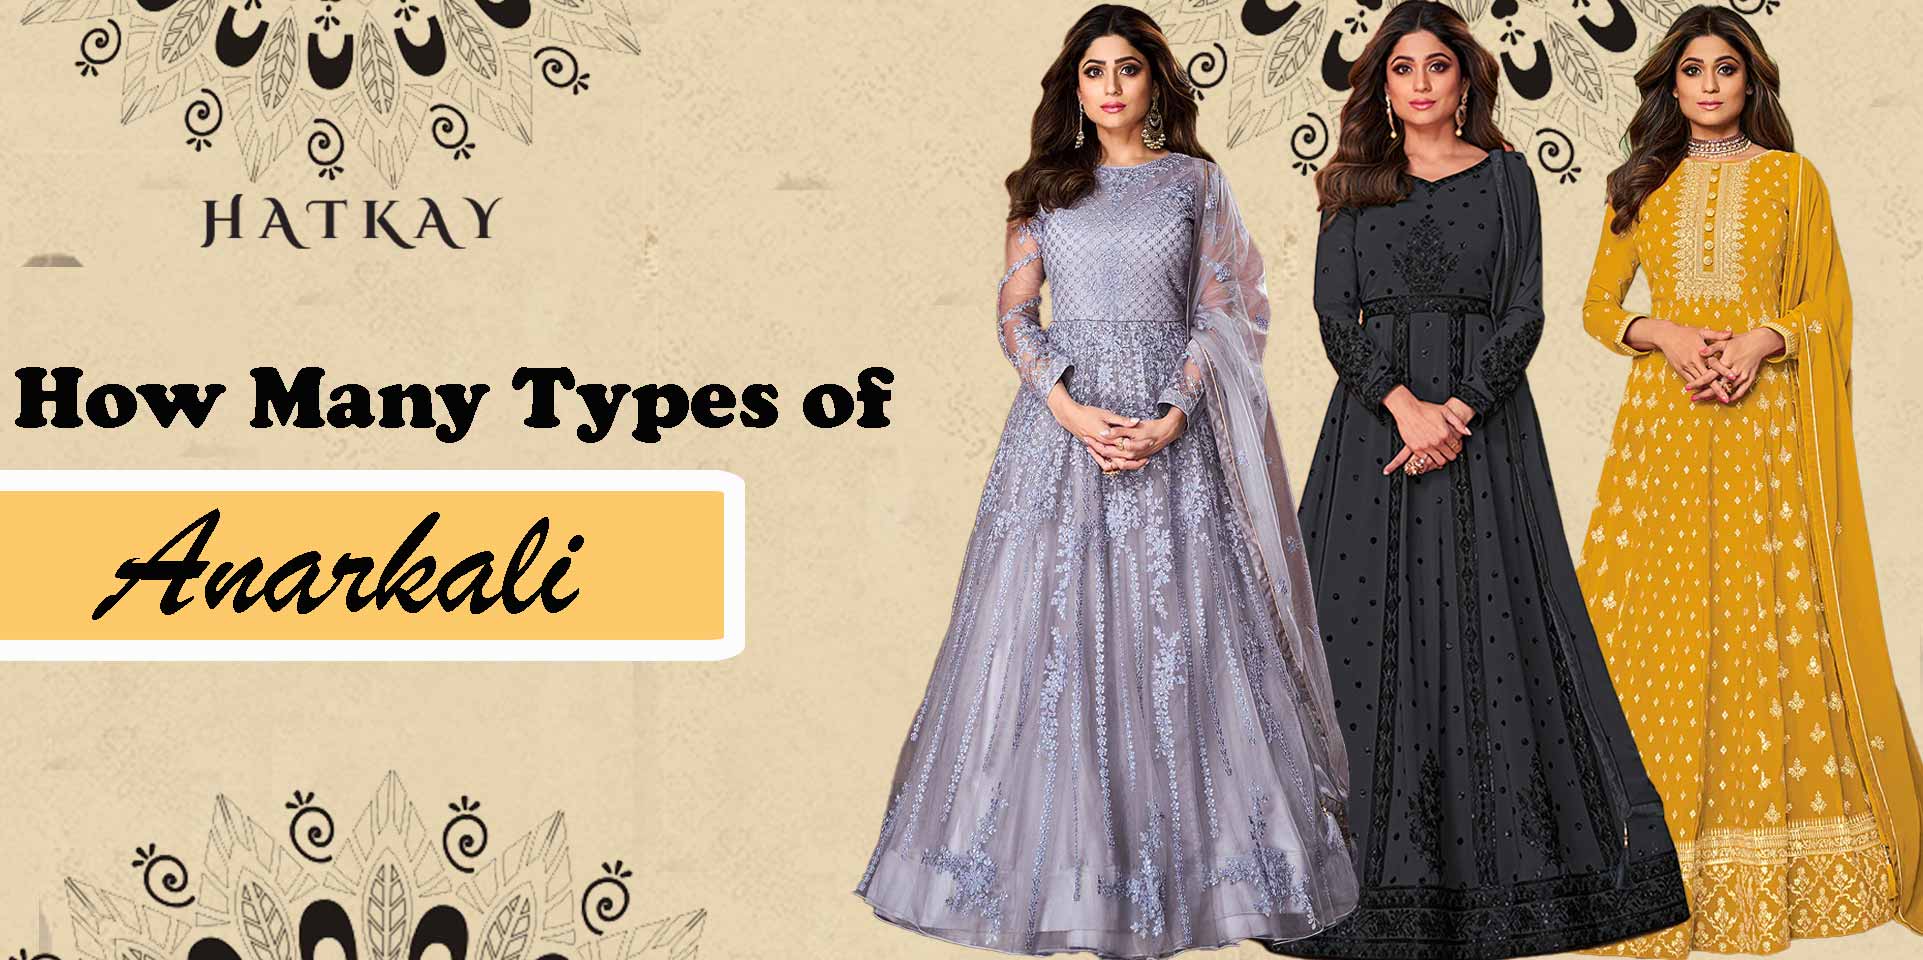 How Many Types of Anarkali Are There?